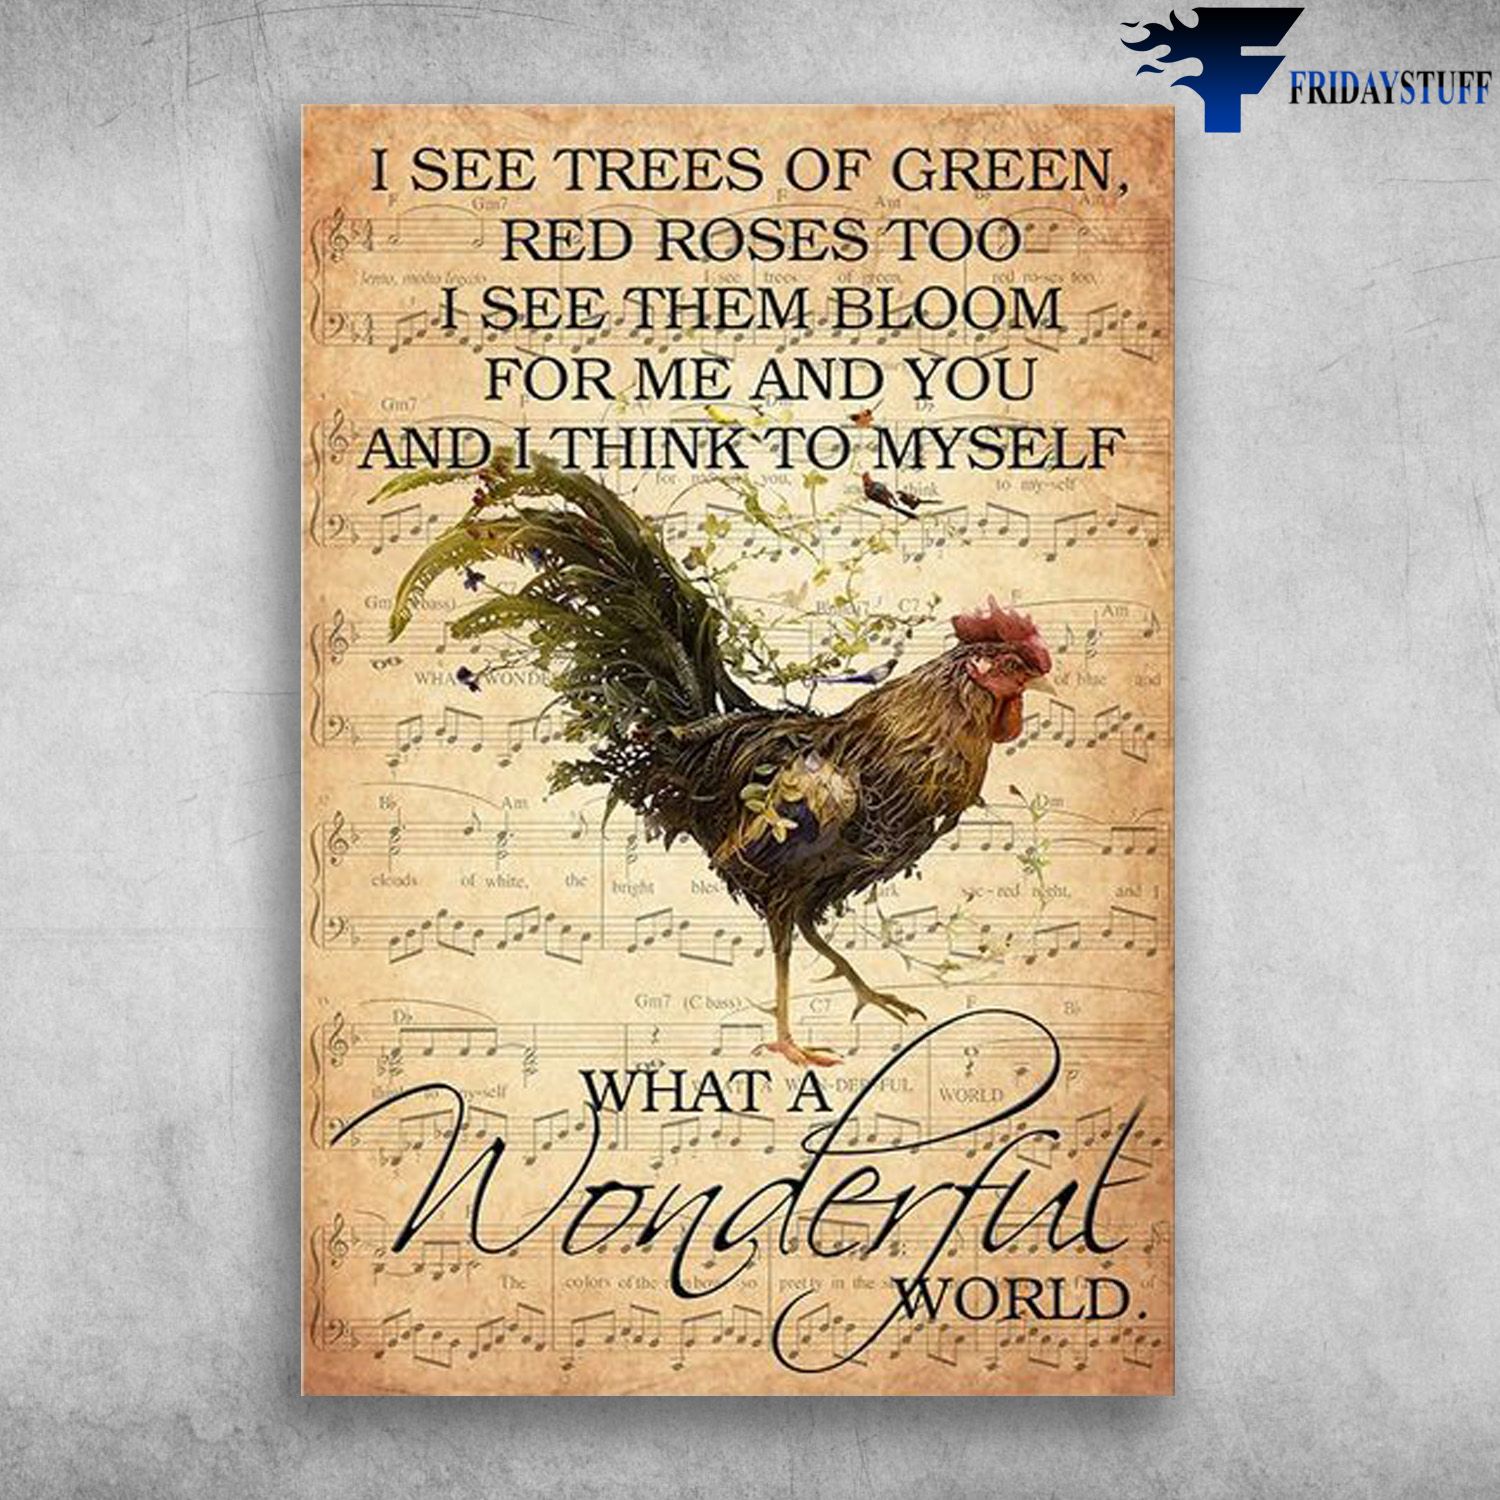 Rooster Music Sheet - I See Trees Of Green, Red Rose Too, I See Them Bloom, For Me And You, And I Think To Myself, What A Wonderful World